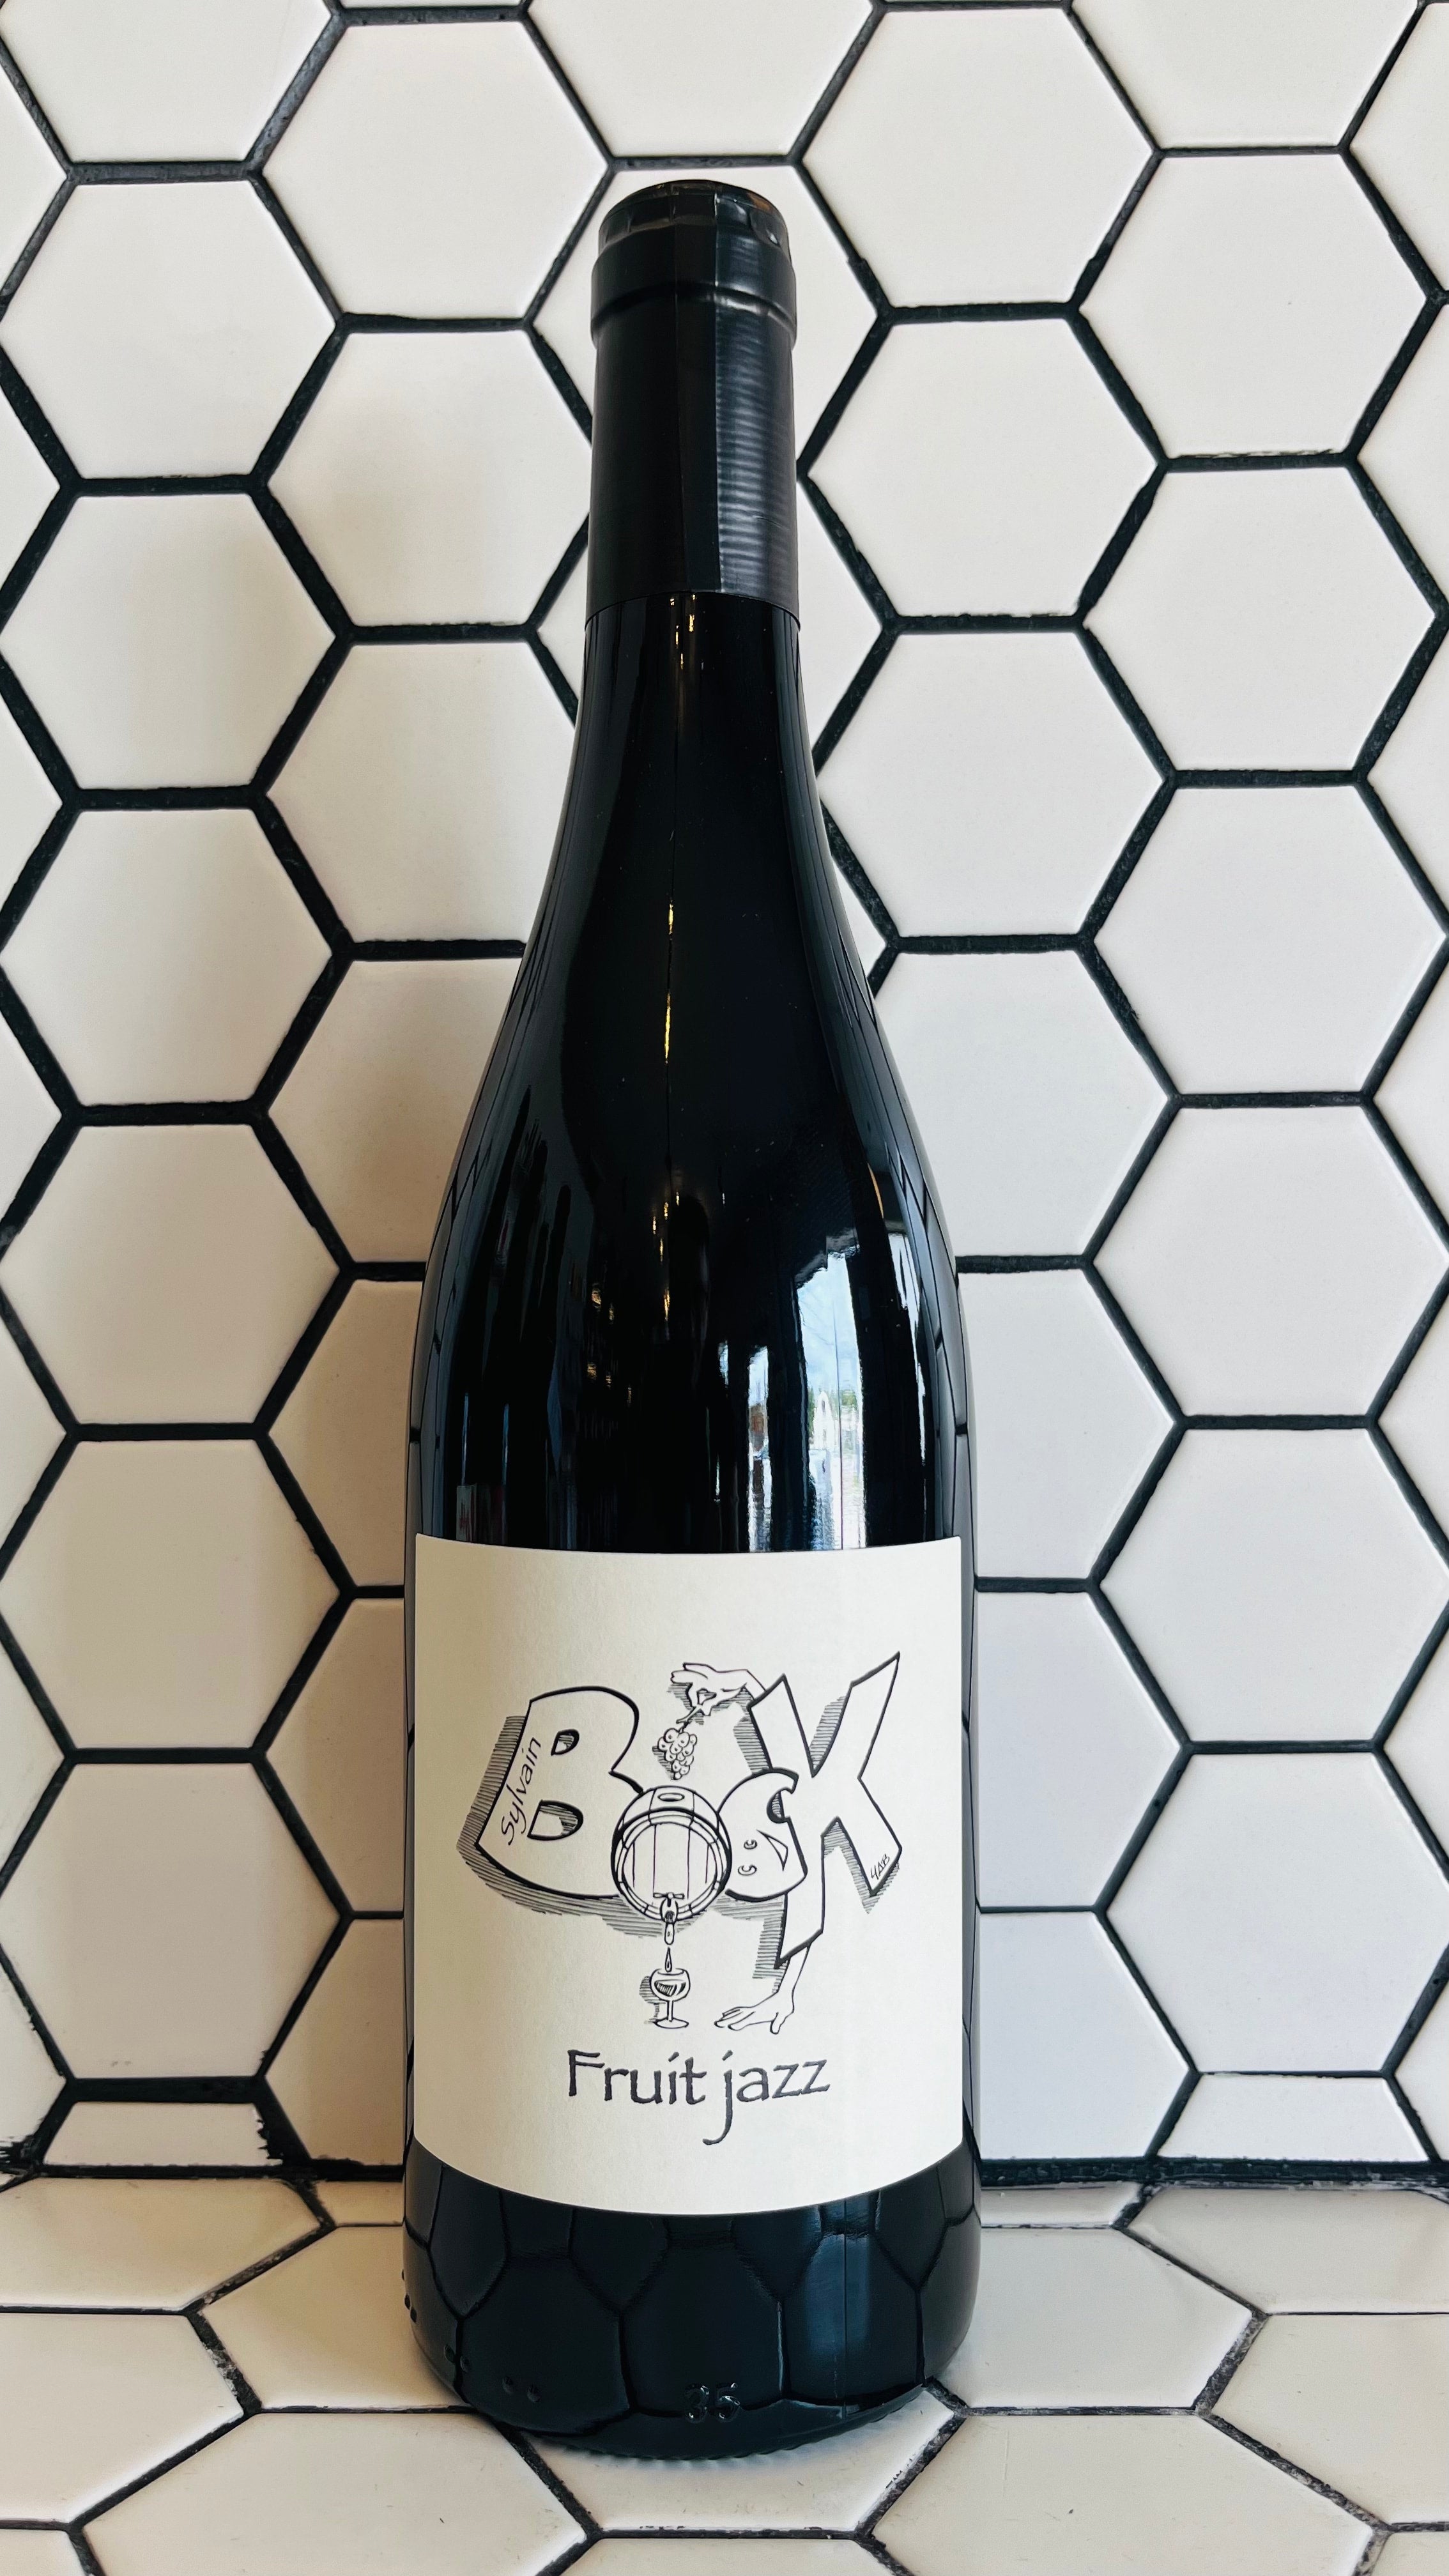 Cloudy Bay Pinot Noir 2014: Beauty in a Glass - Magnolia Days